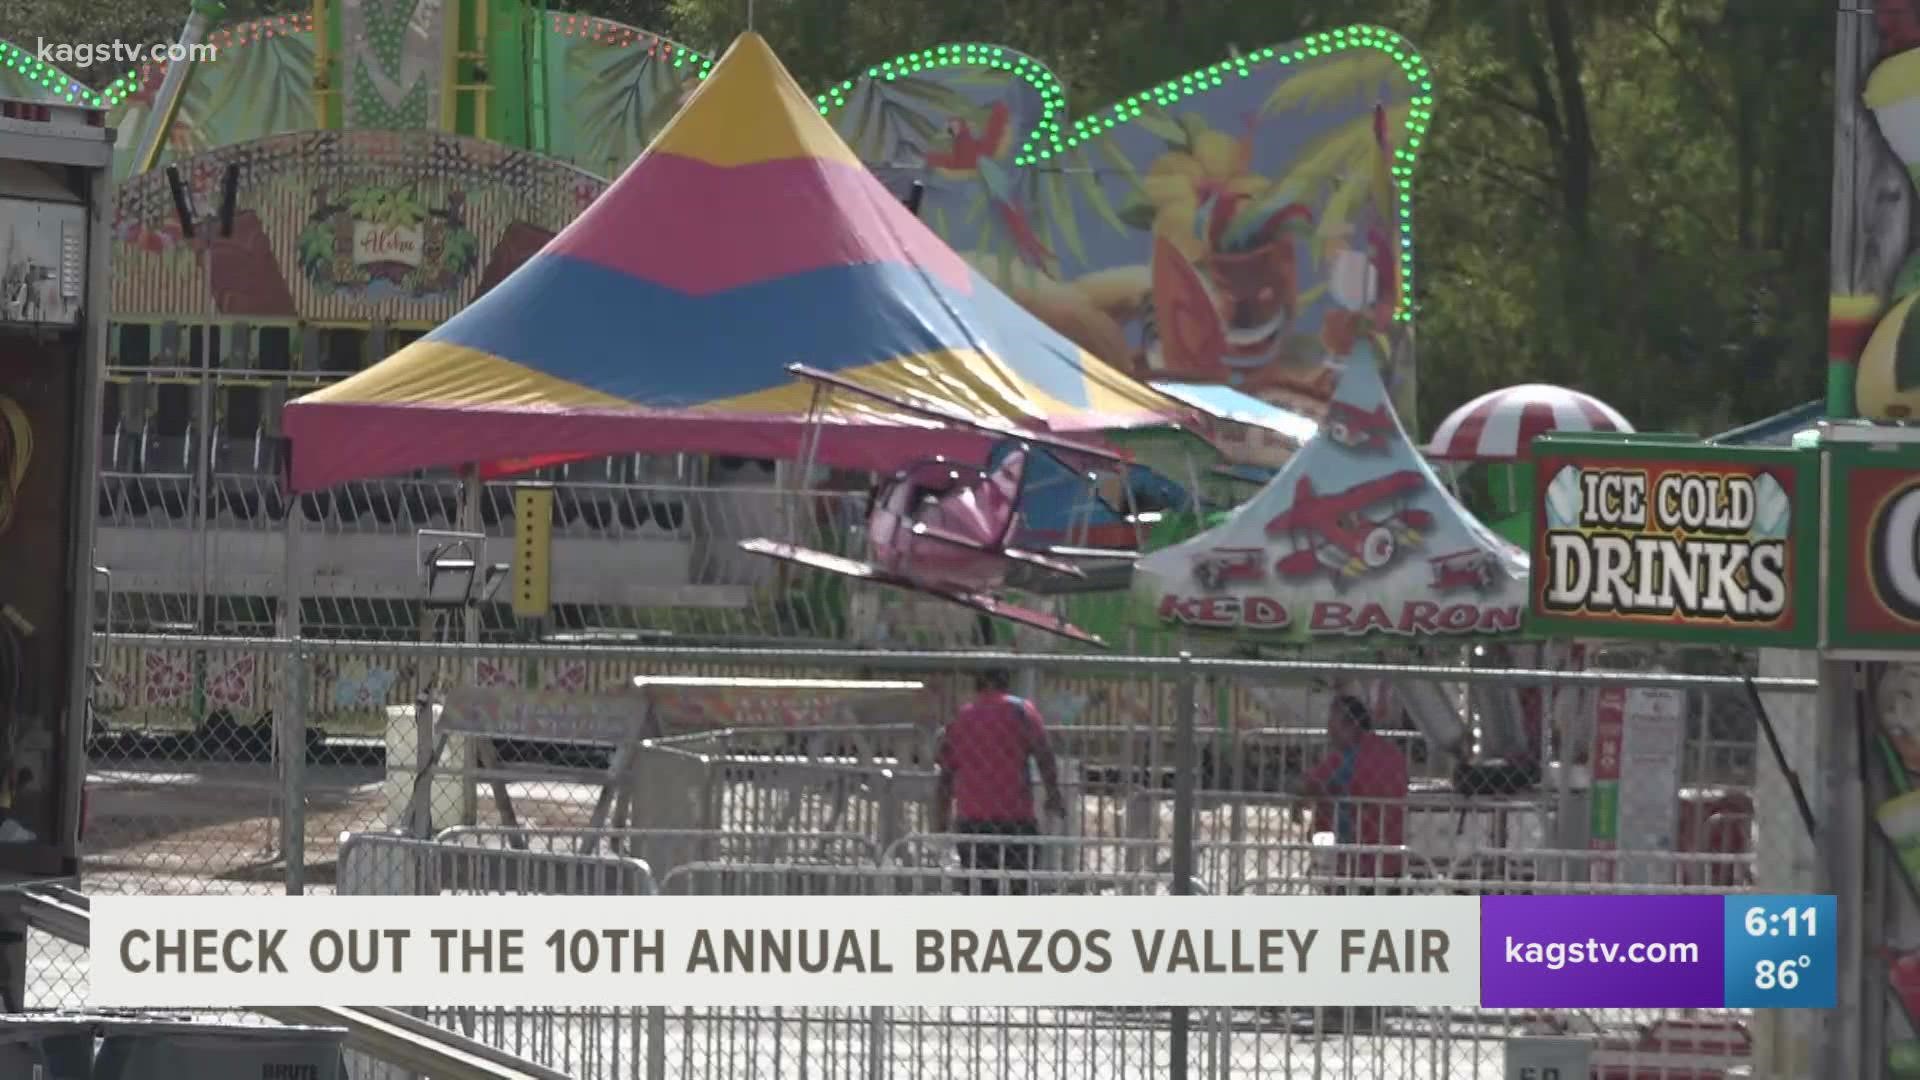 For $40, you and your family can have the ultimate fair experience at the Brazos County Expo Center.